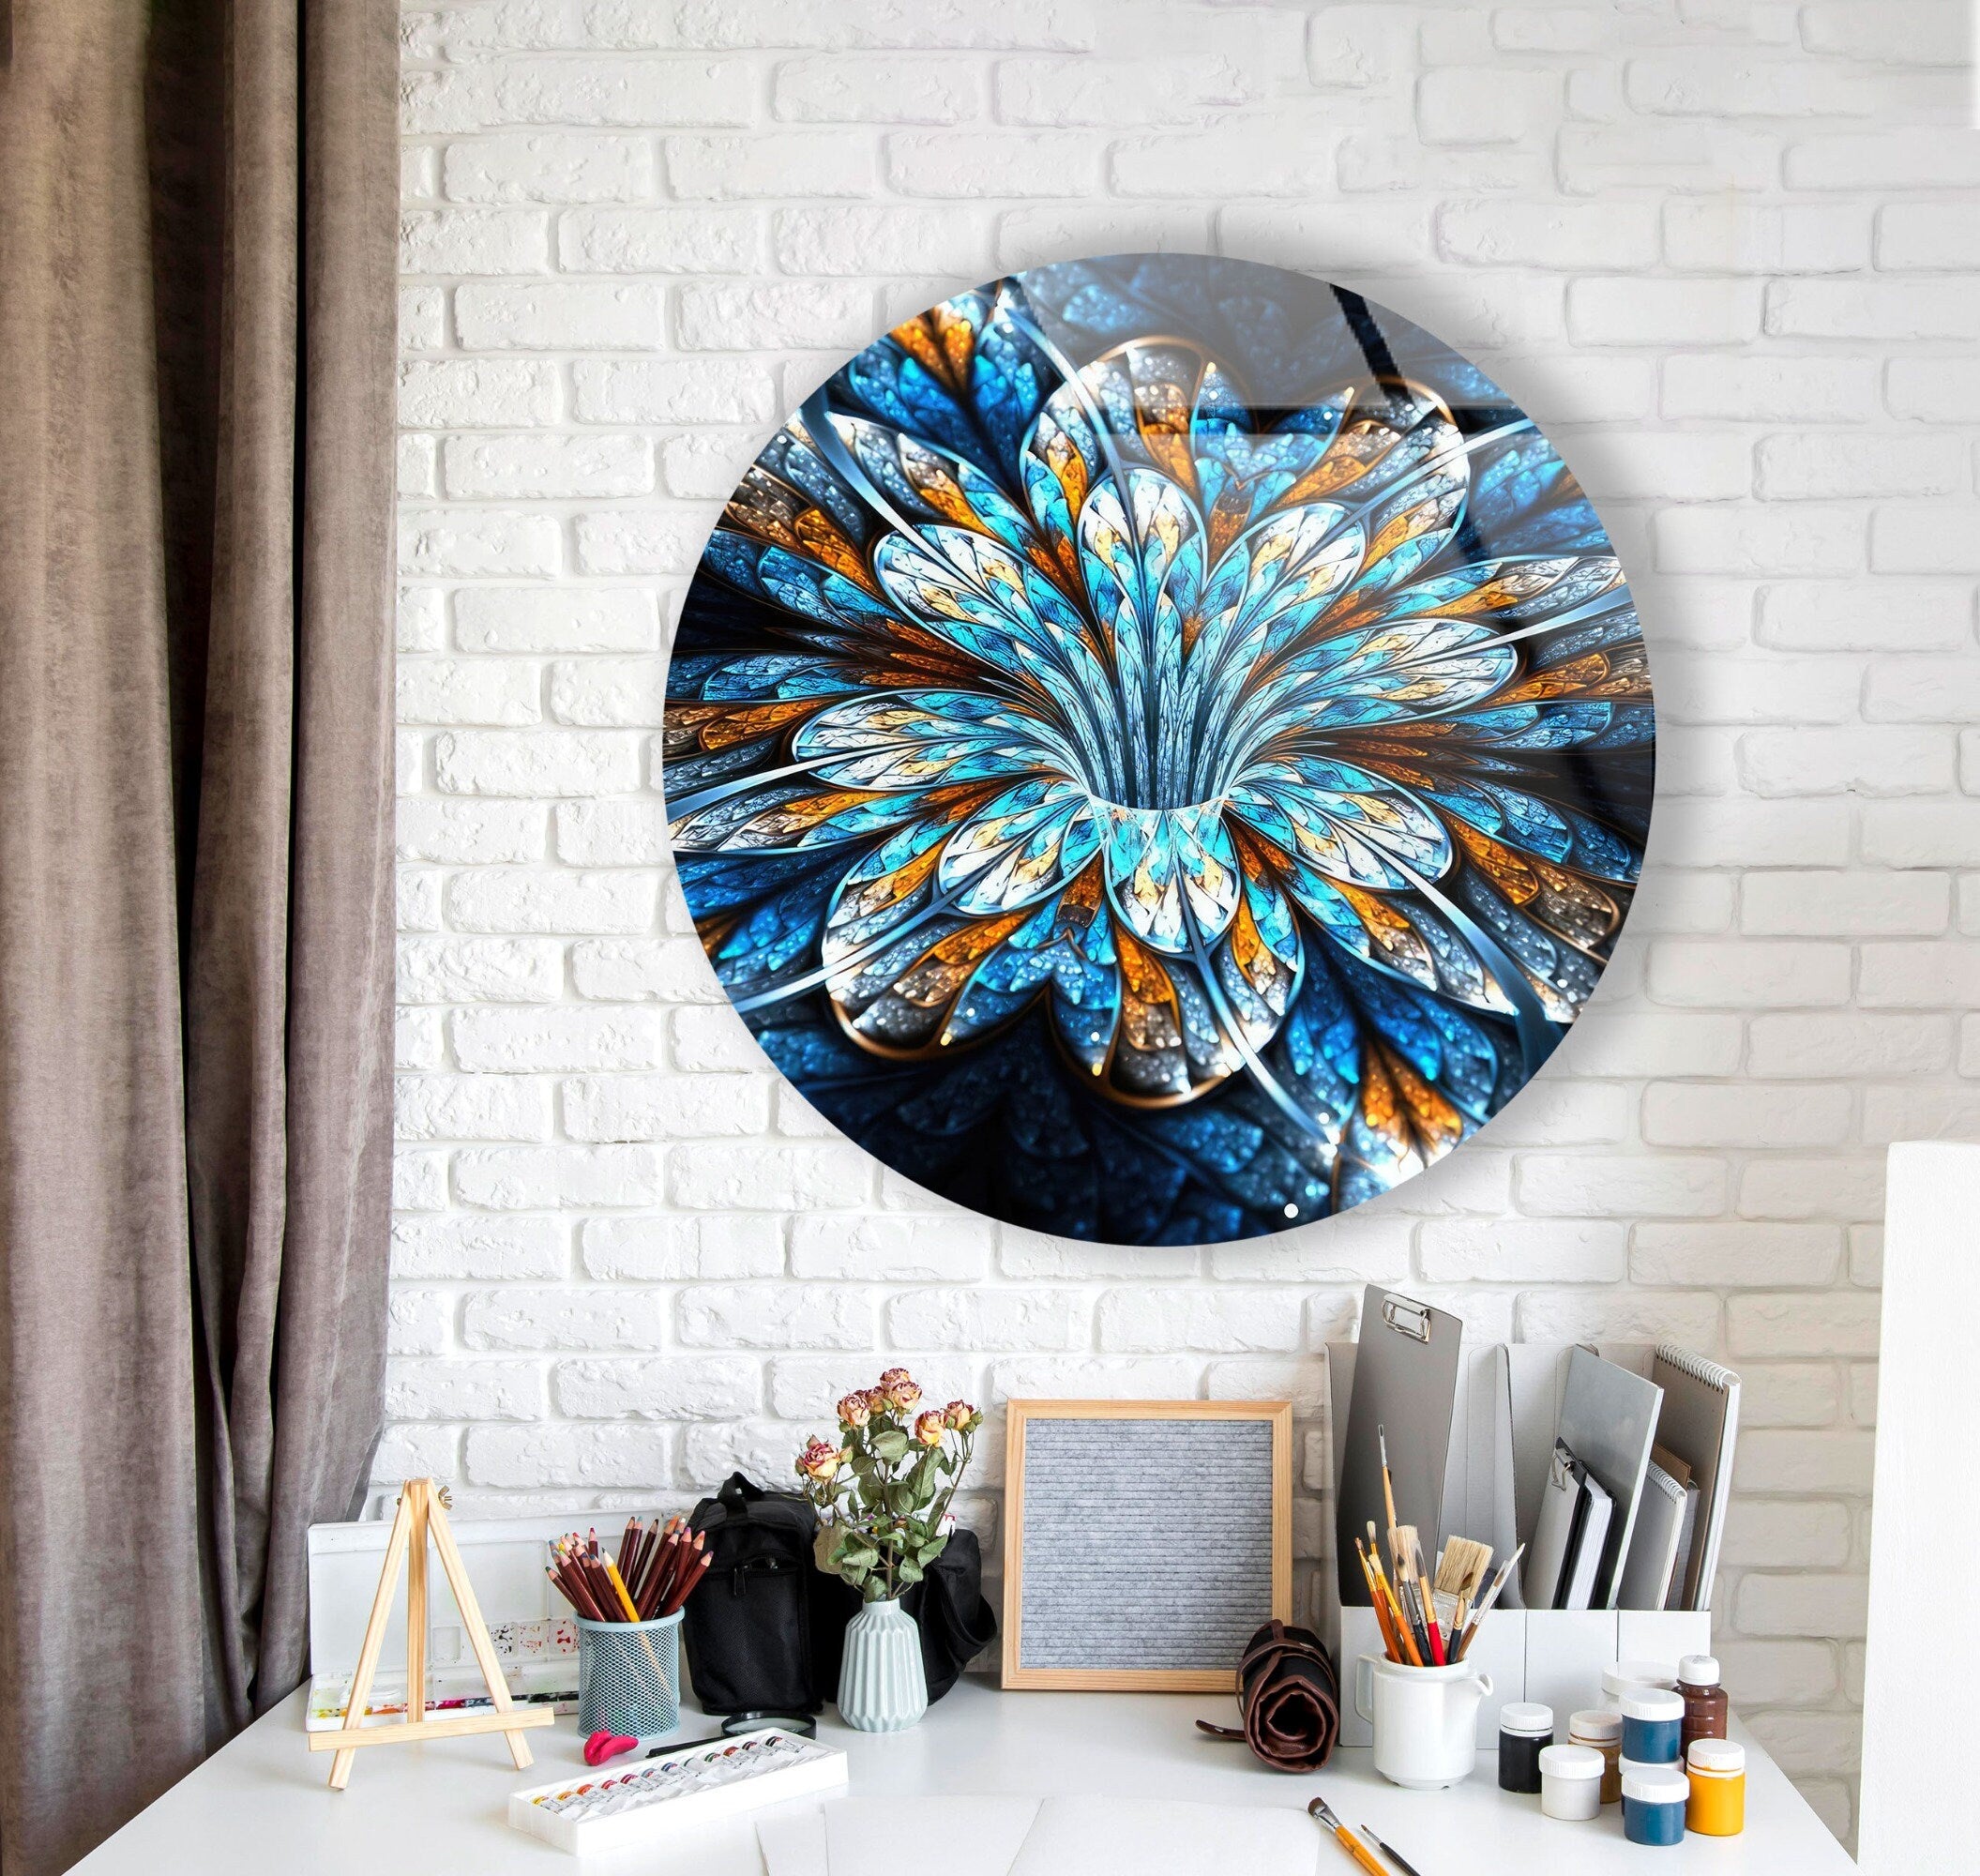 Abstract Flower Fractal Round Tempered Glass Wall Art